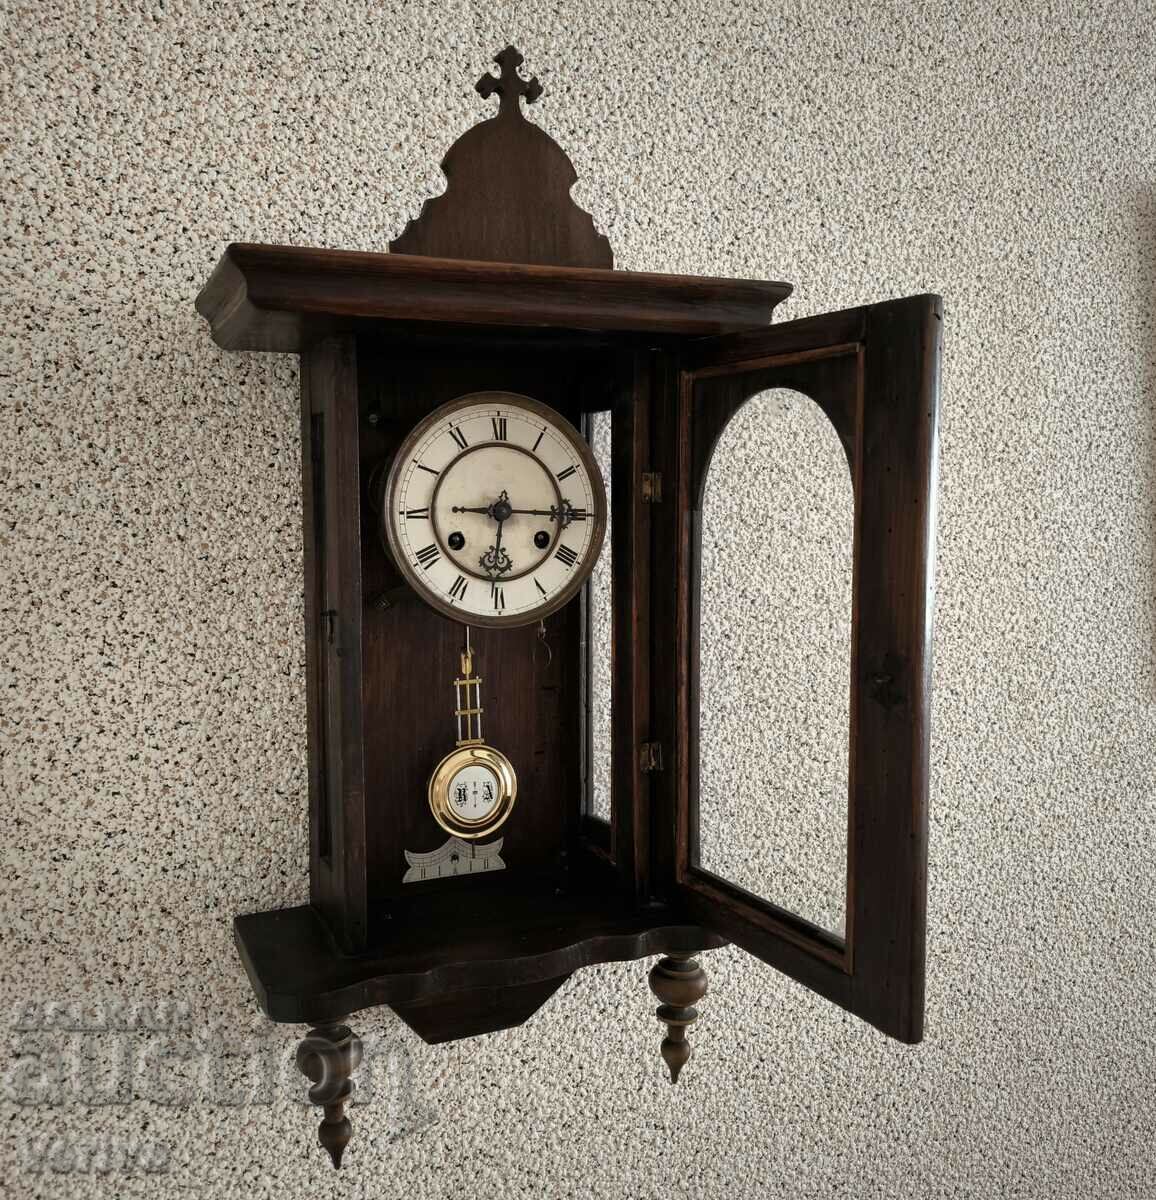 Old French wall clock.